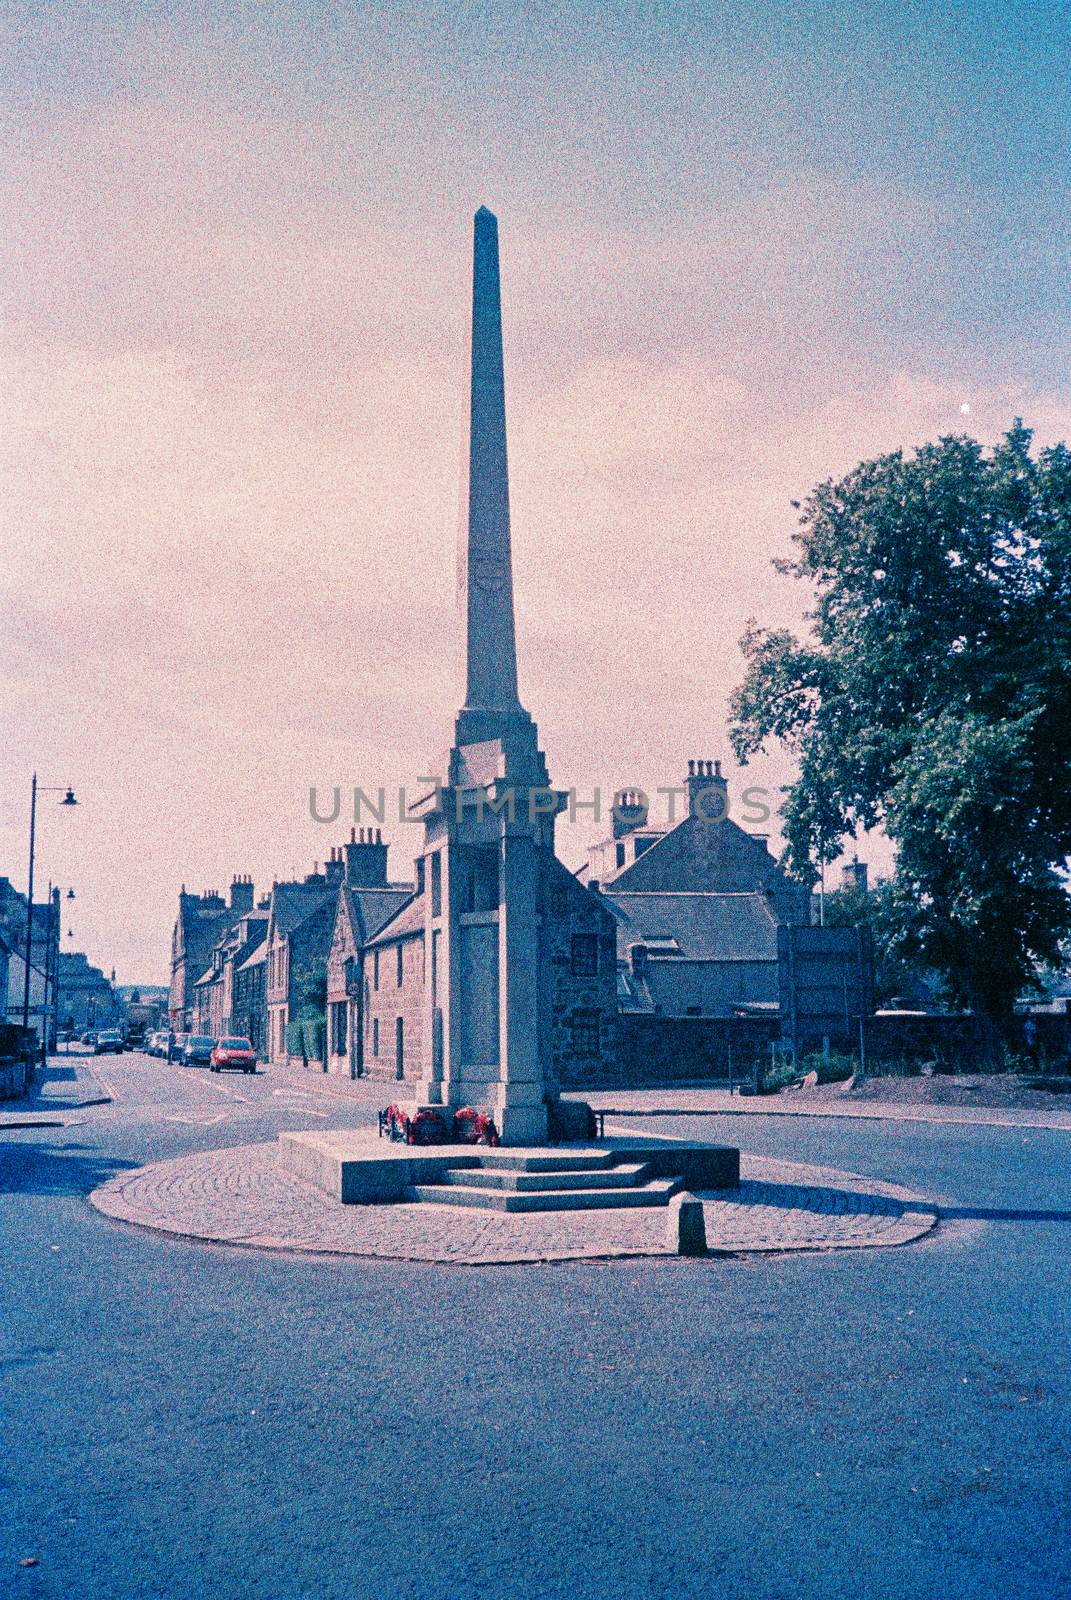 City memorial in Huntly by megalithicmatt